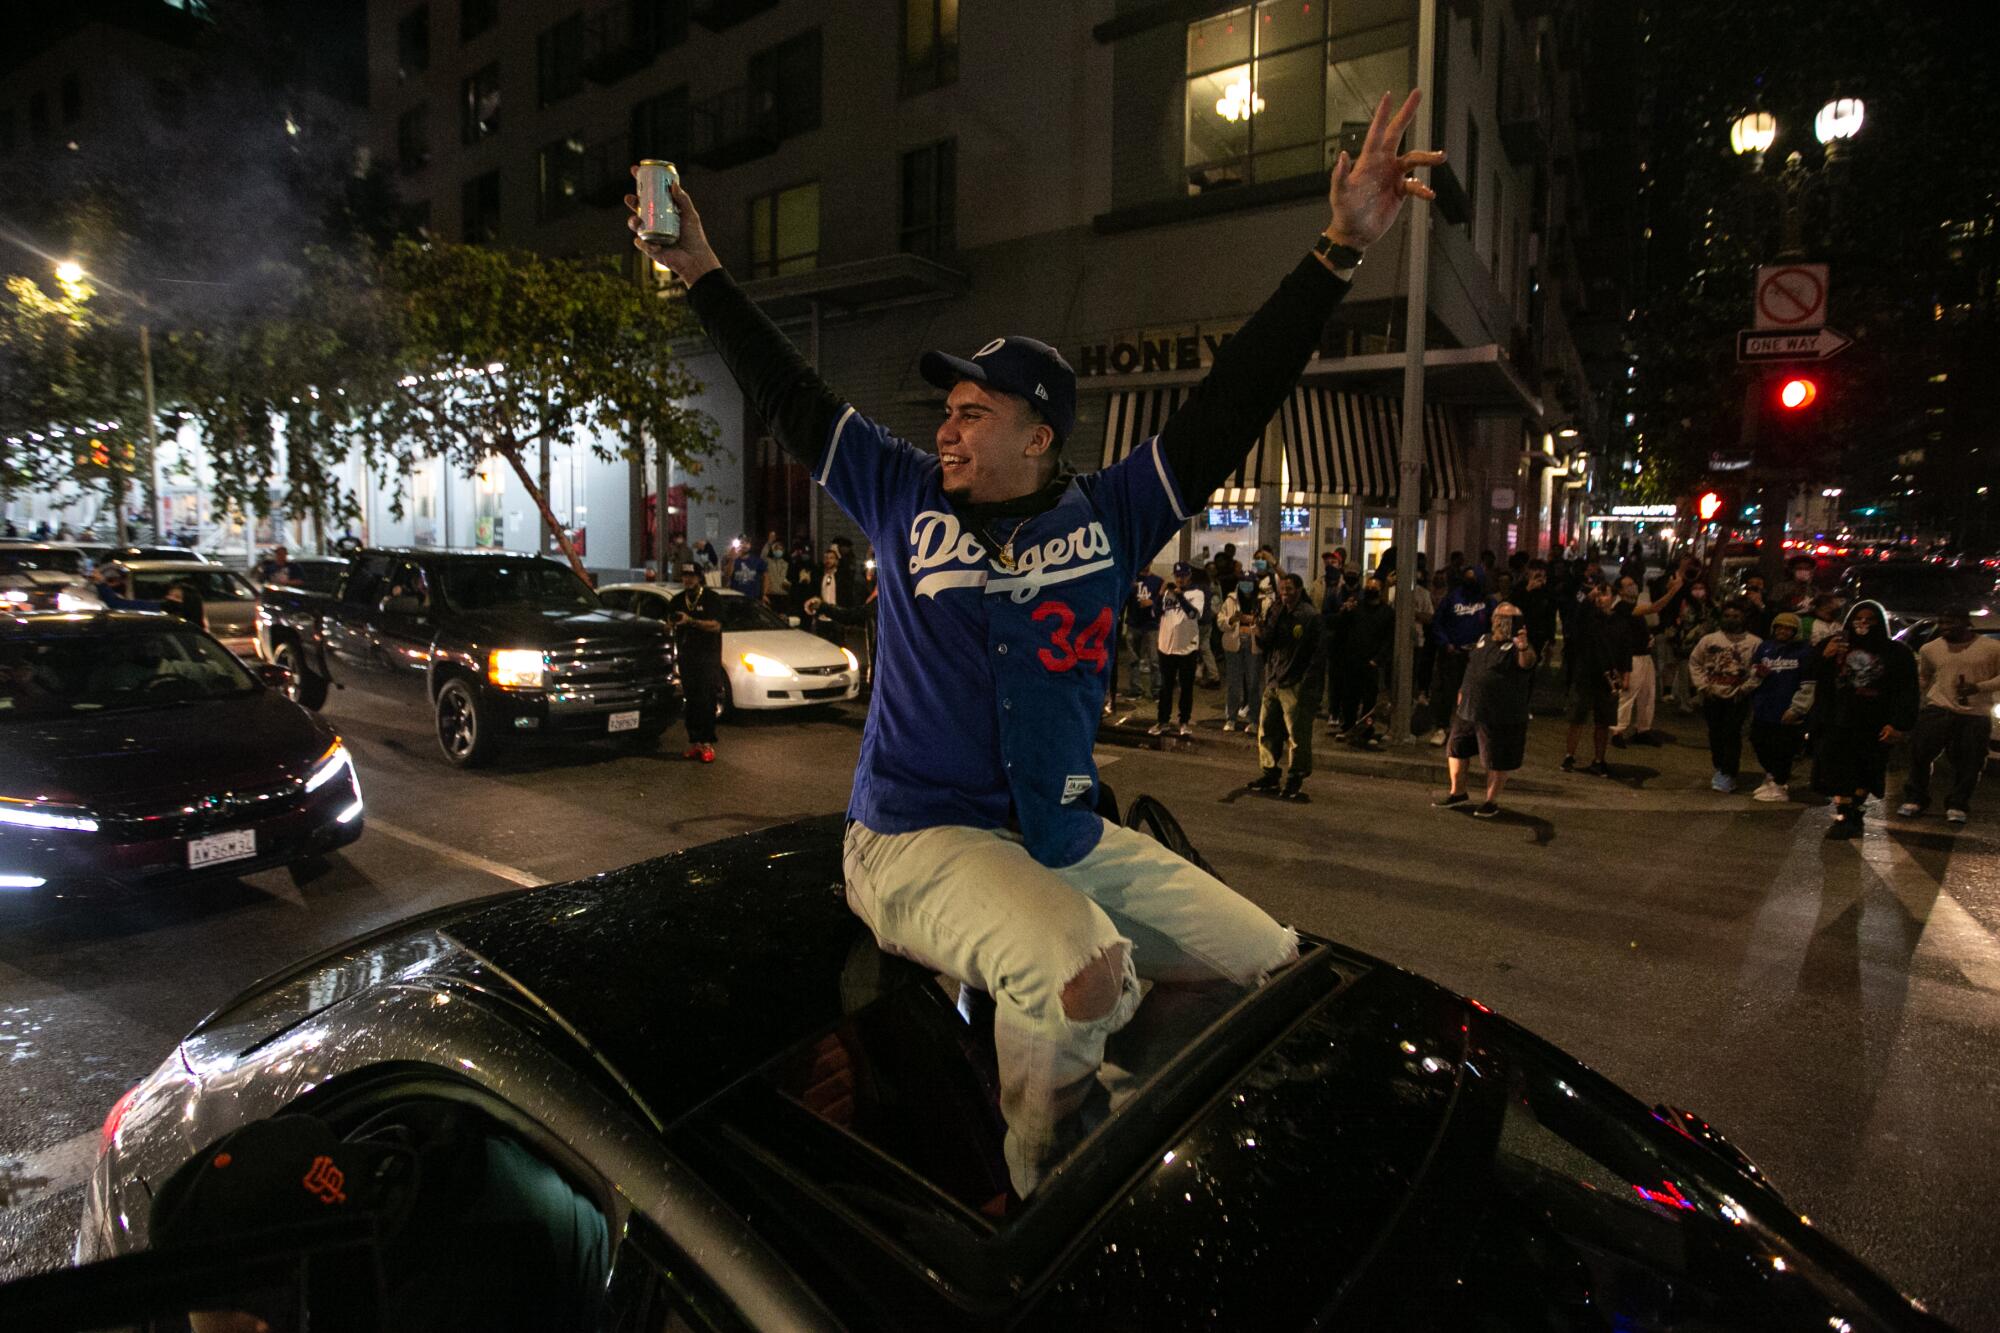 A fan lifts both arms while atop a car, legs through its sunroof, as the vehicle moves along an L.A. street.